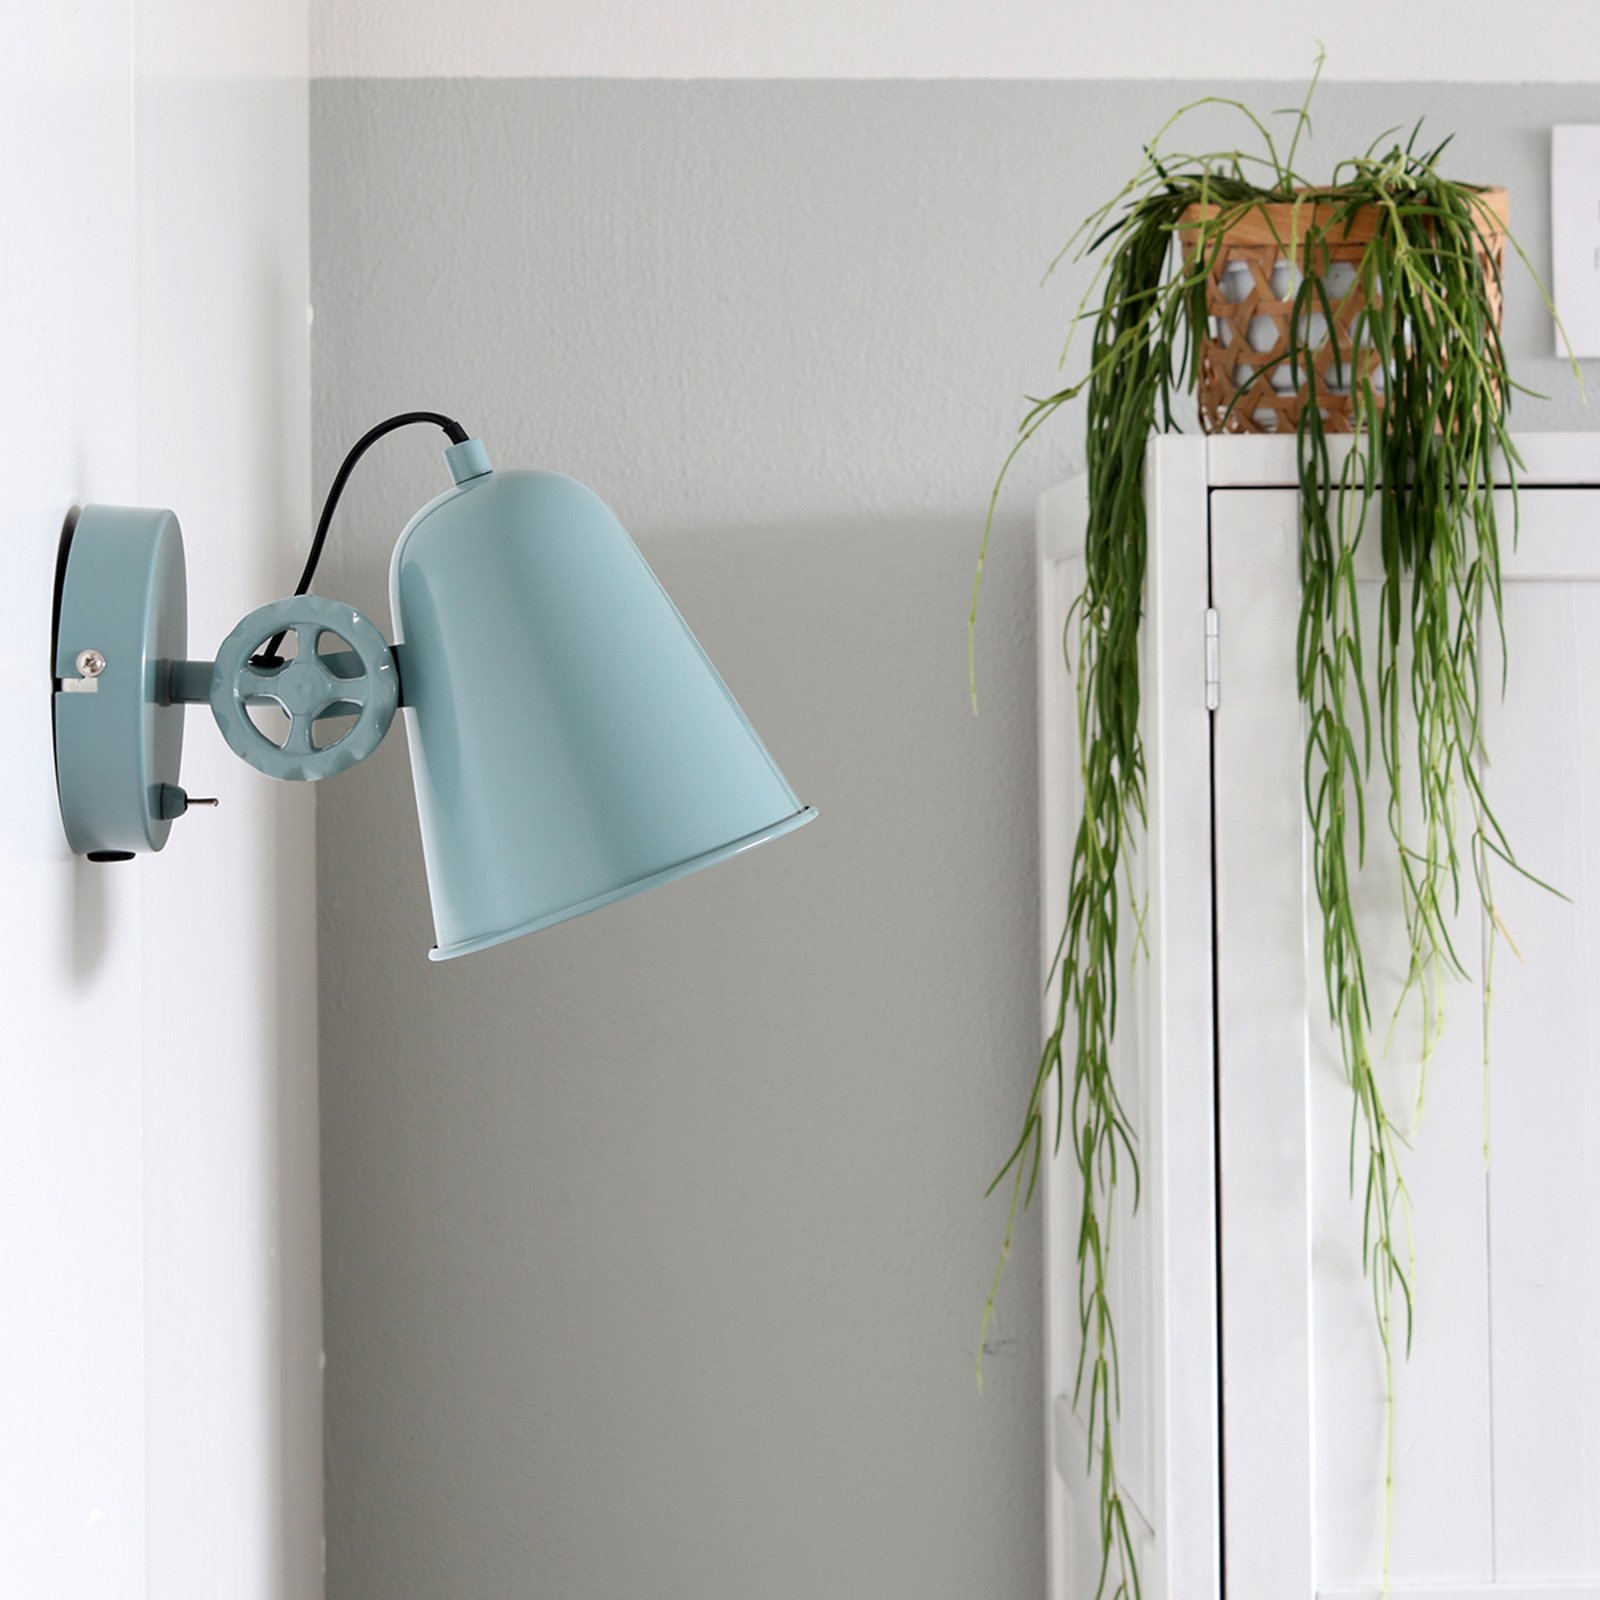 Dolphin industrial style wall light, green